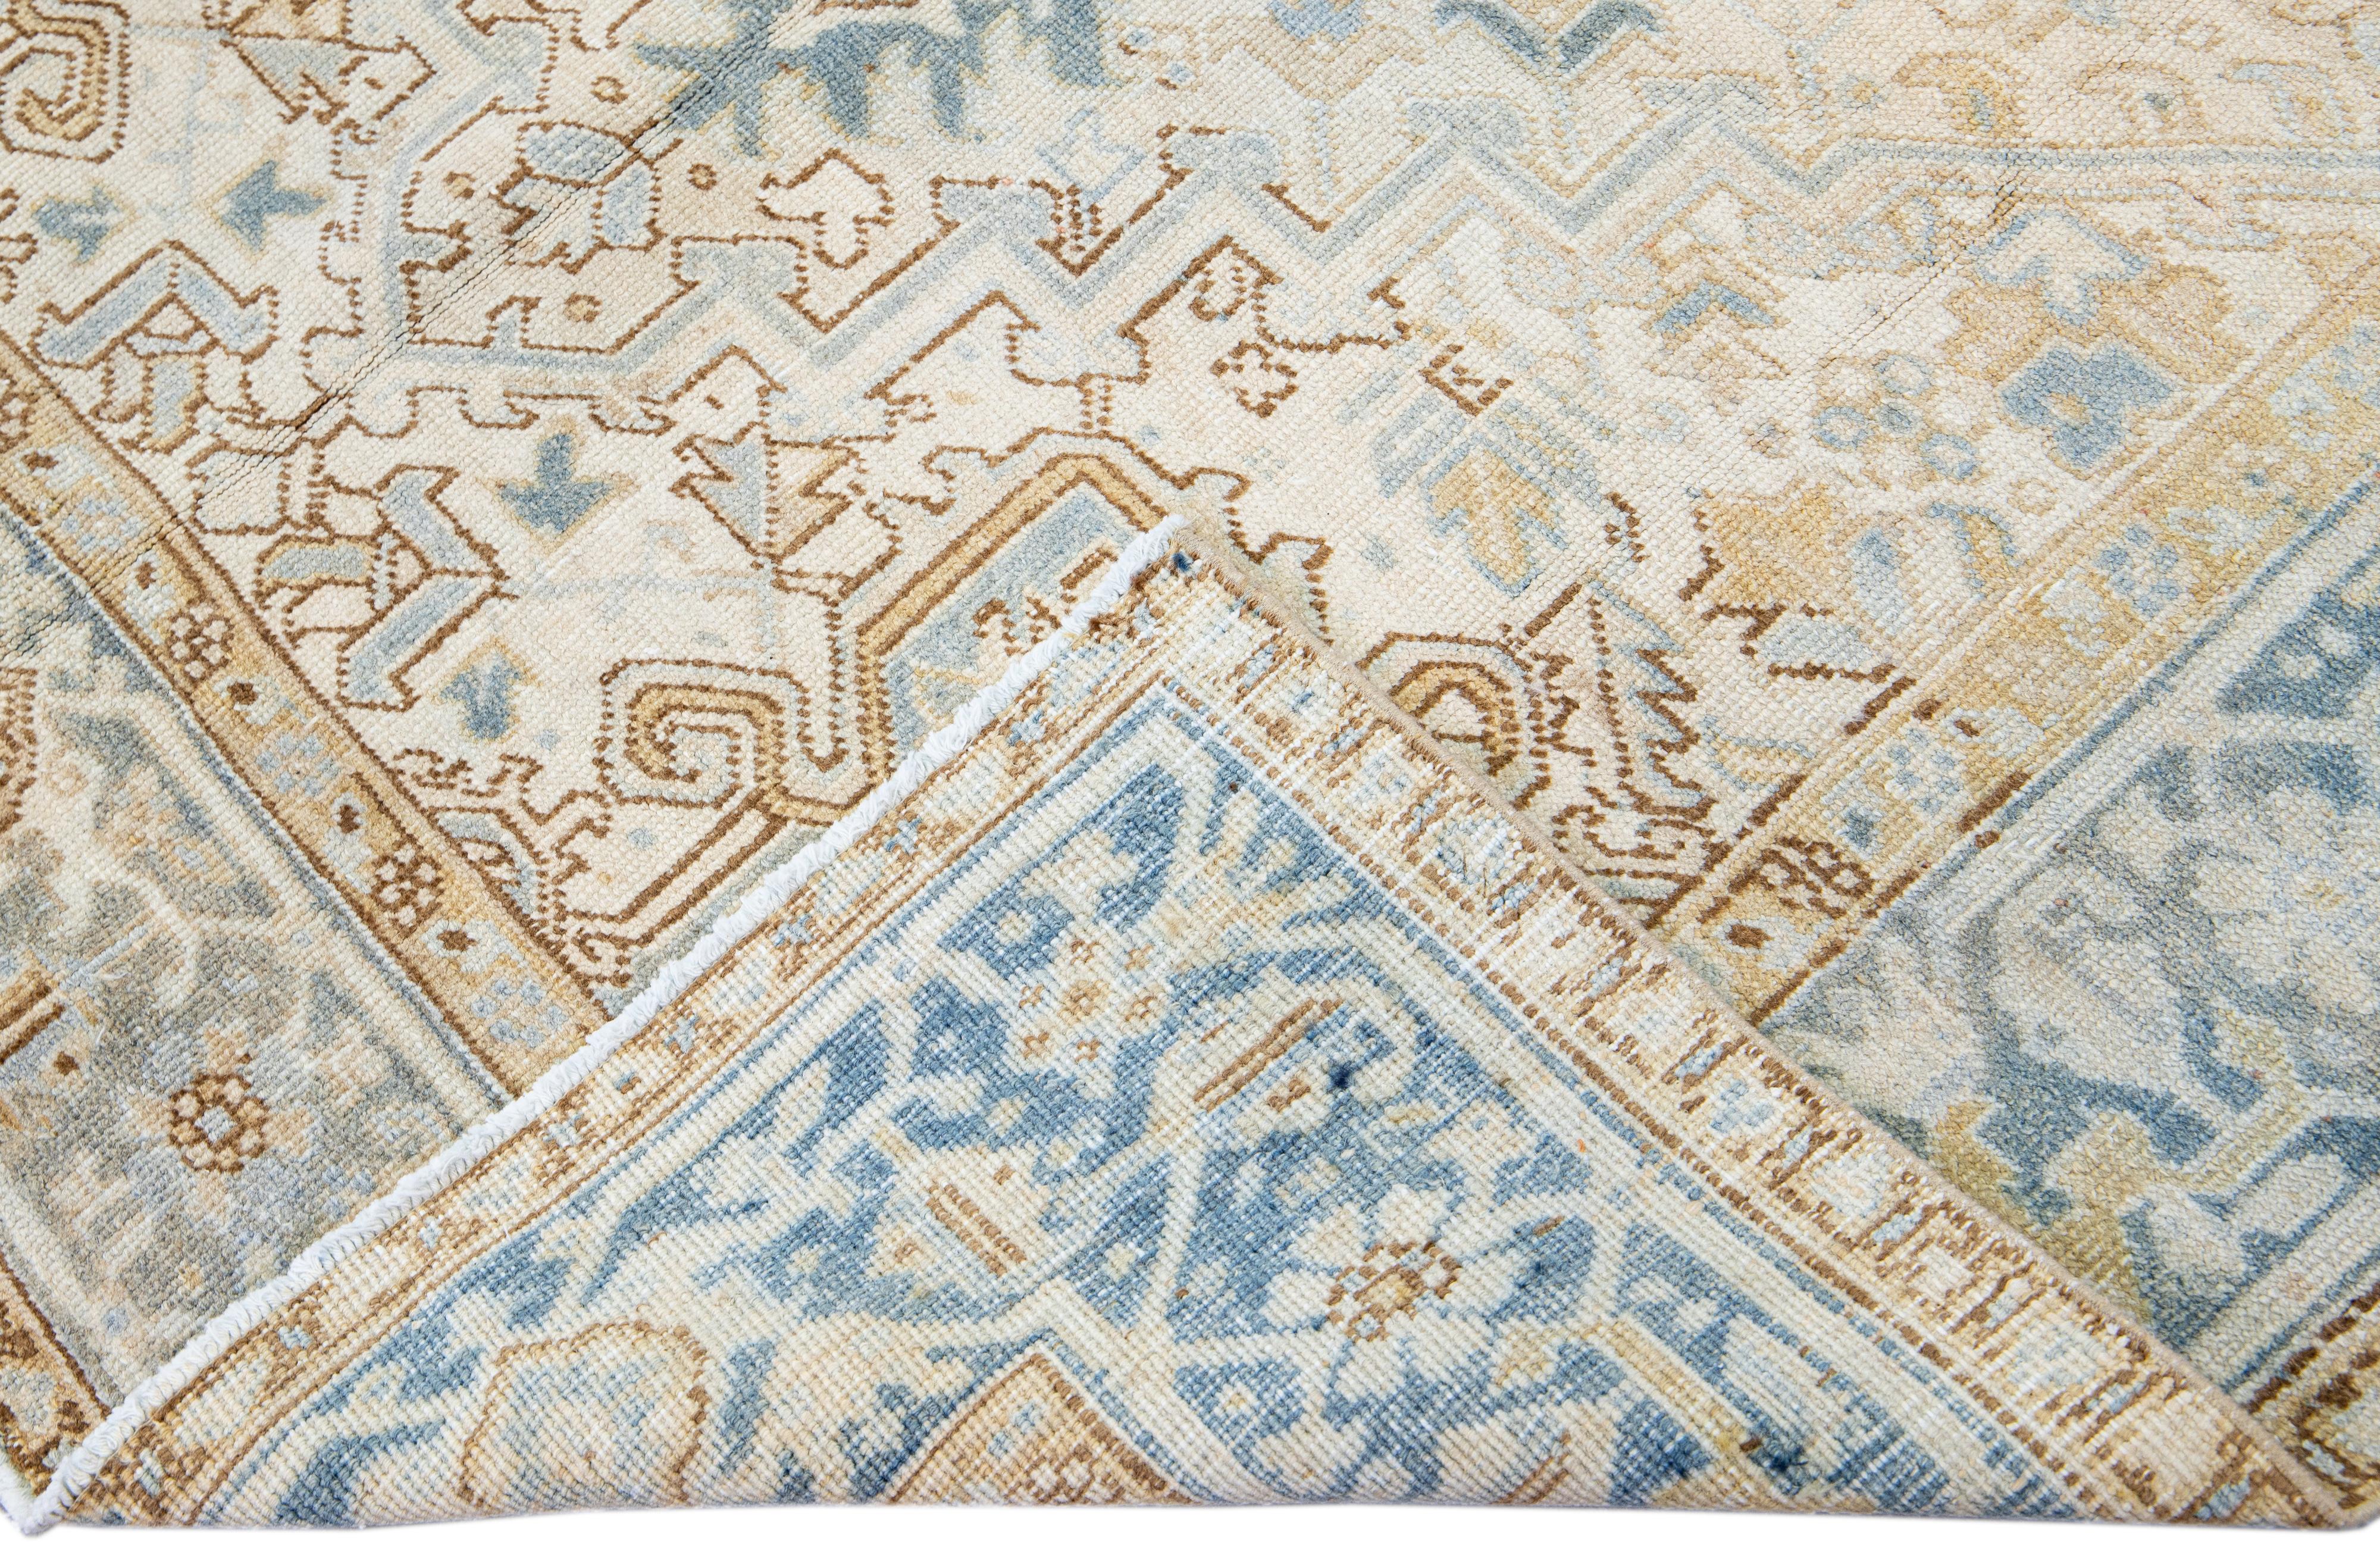 Beautiful antique Heriz hand-knotted wool rug with a beige field. This Persian rug has a blue frame and accents in a gorgeous all-over layout geometric medallion floral motif.

This rug measures: 6'9